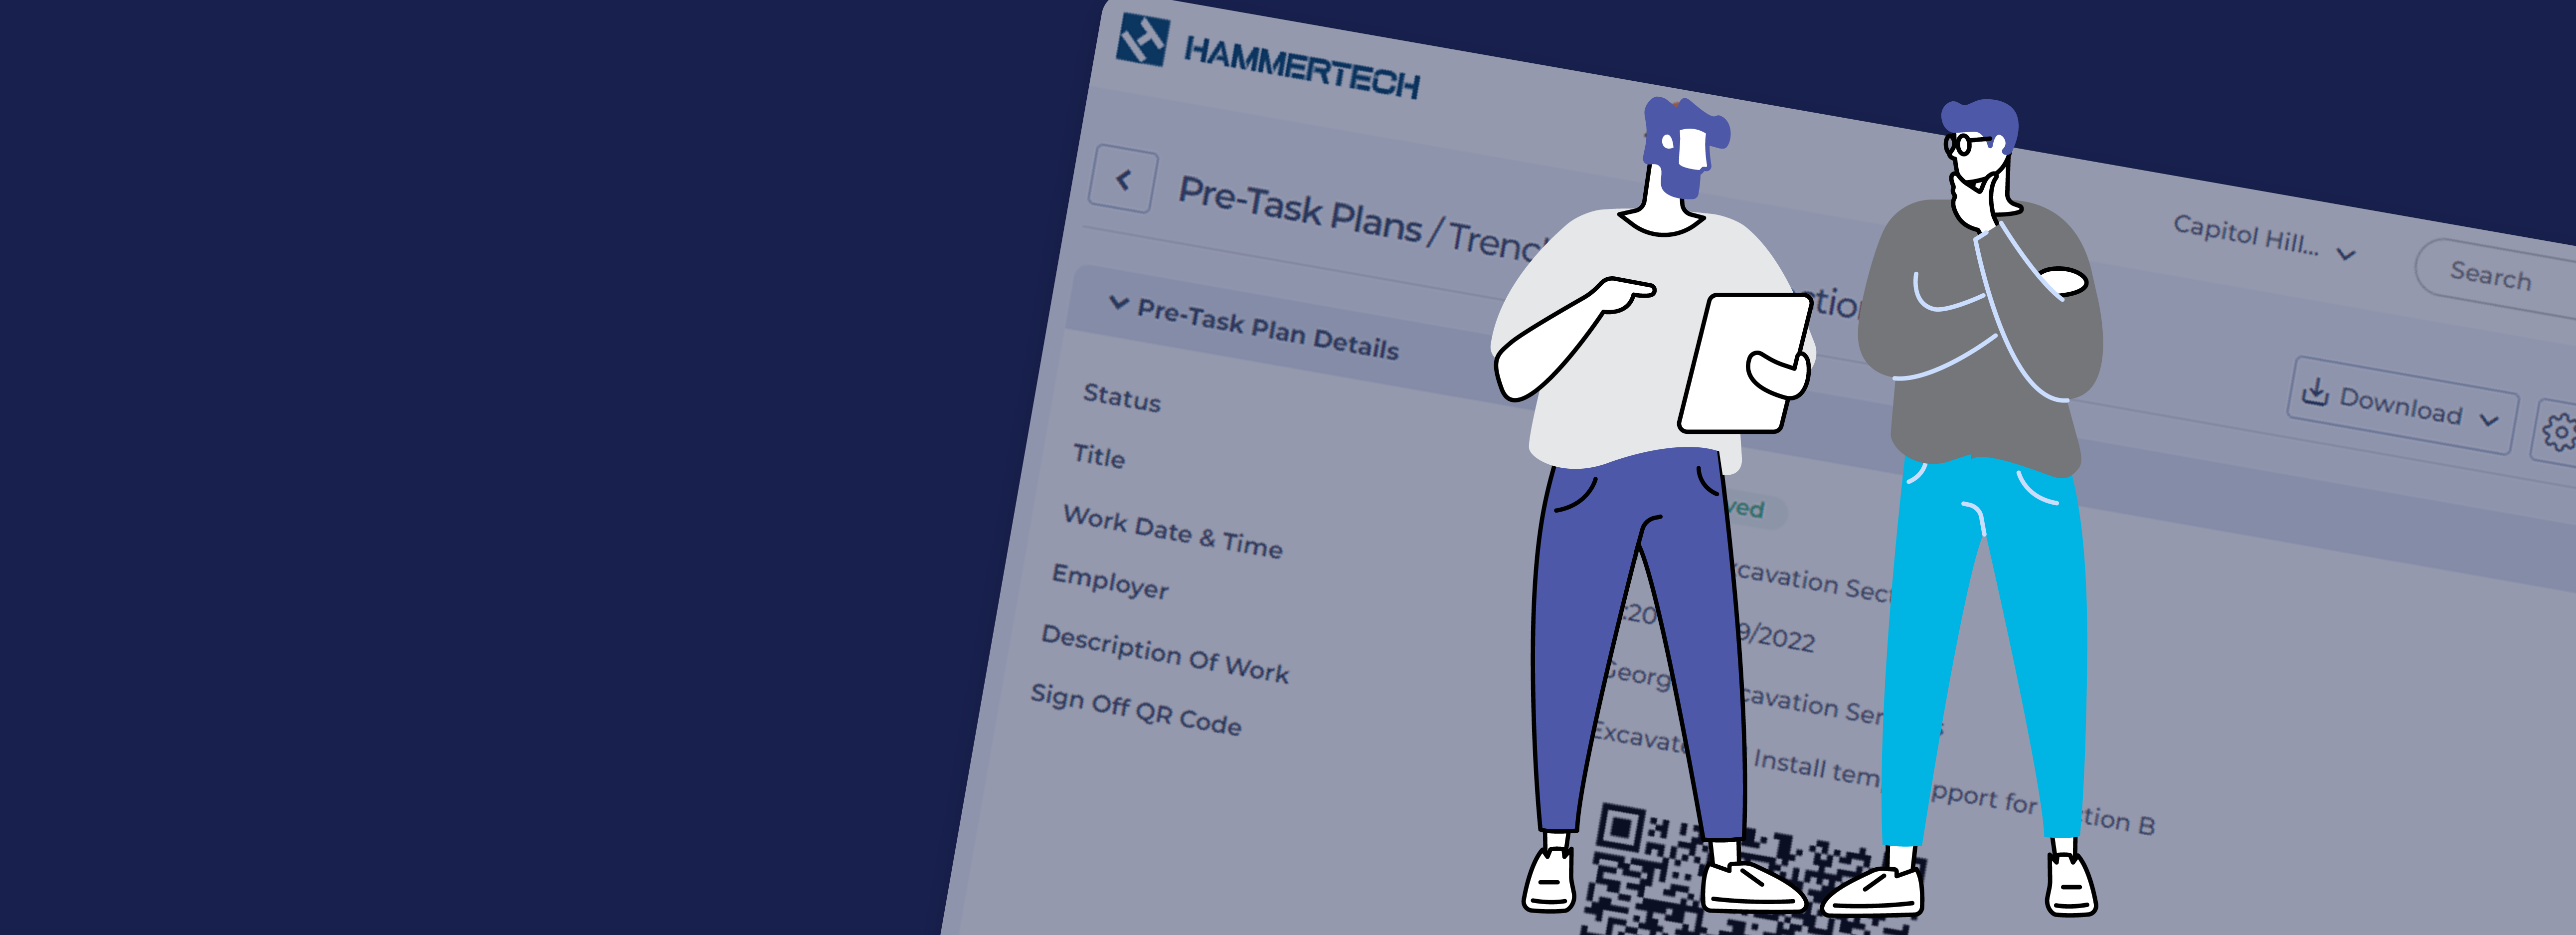 Image of two guys discussing the benefits of digital vs. paper-based pre task plan options. There is a screen of HammerTech's Pre-Task Plan module in the background. 